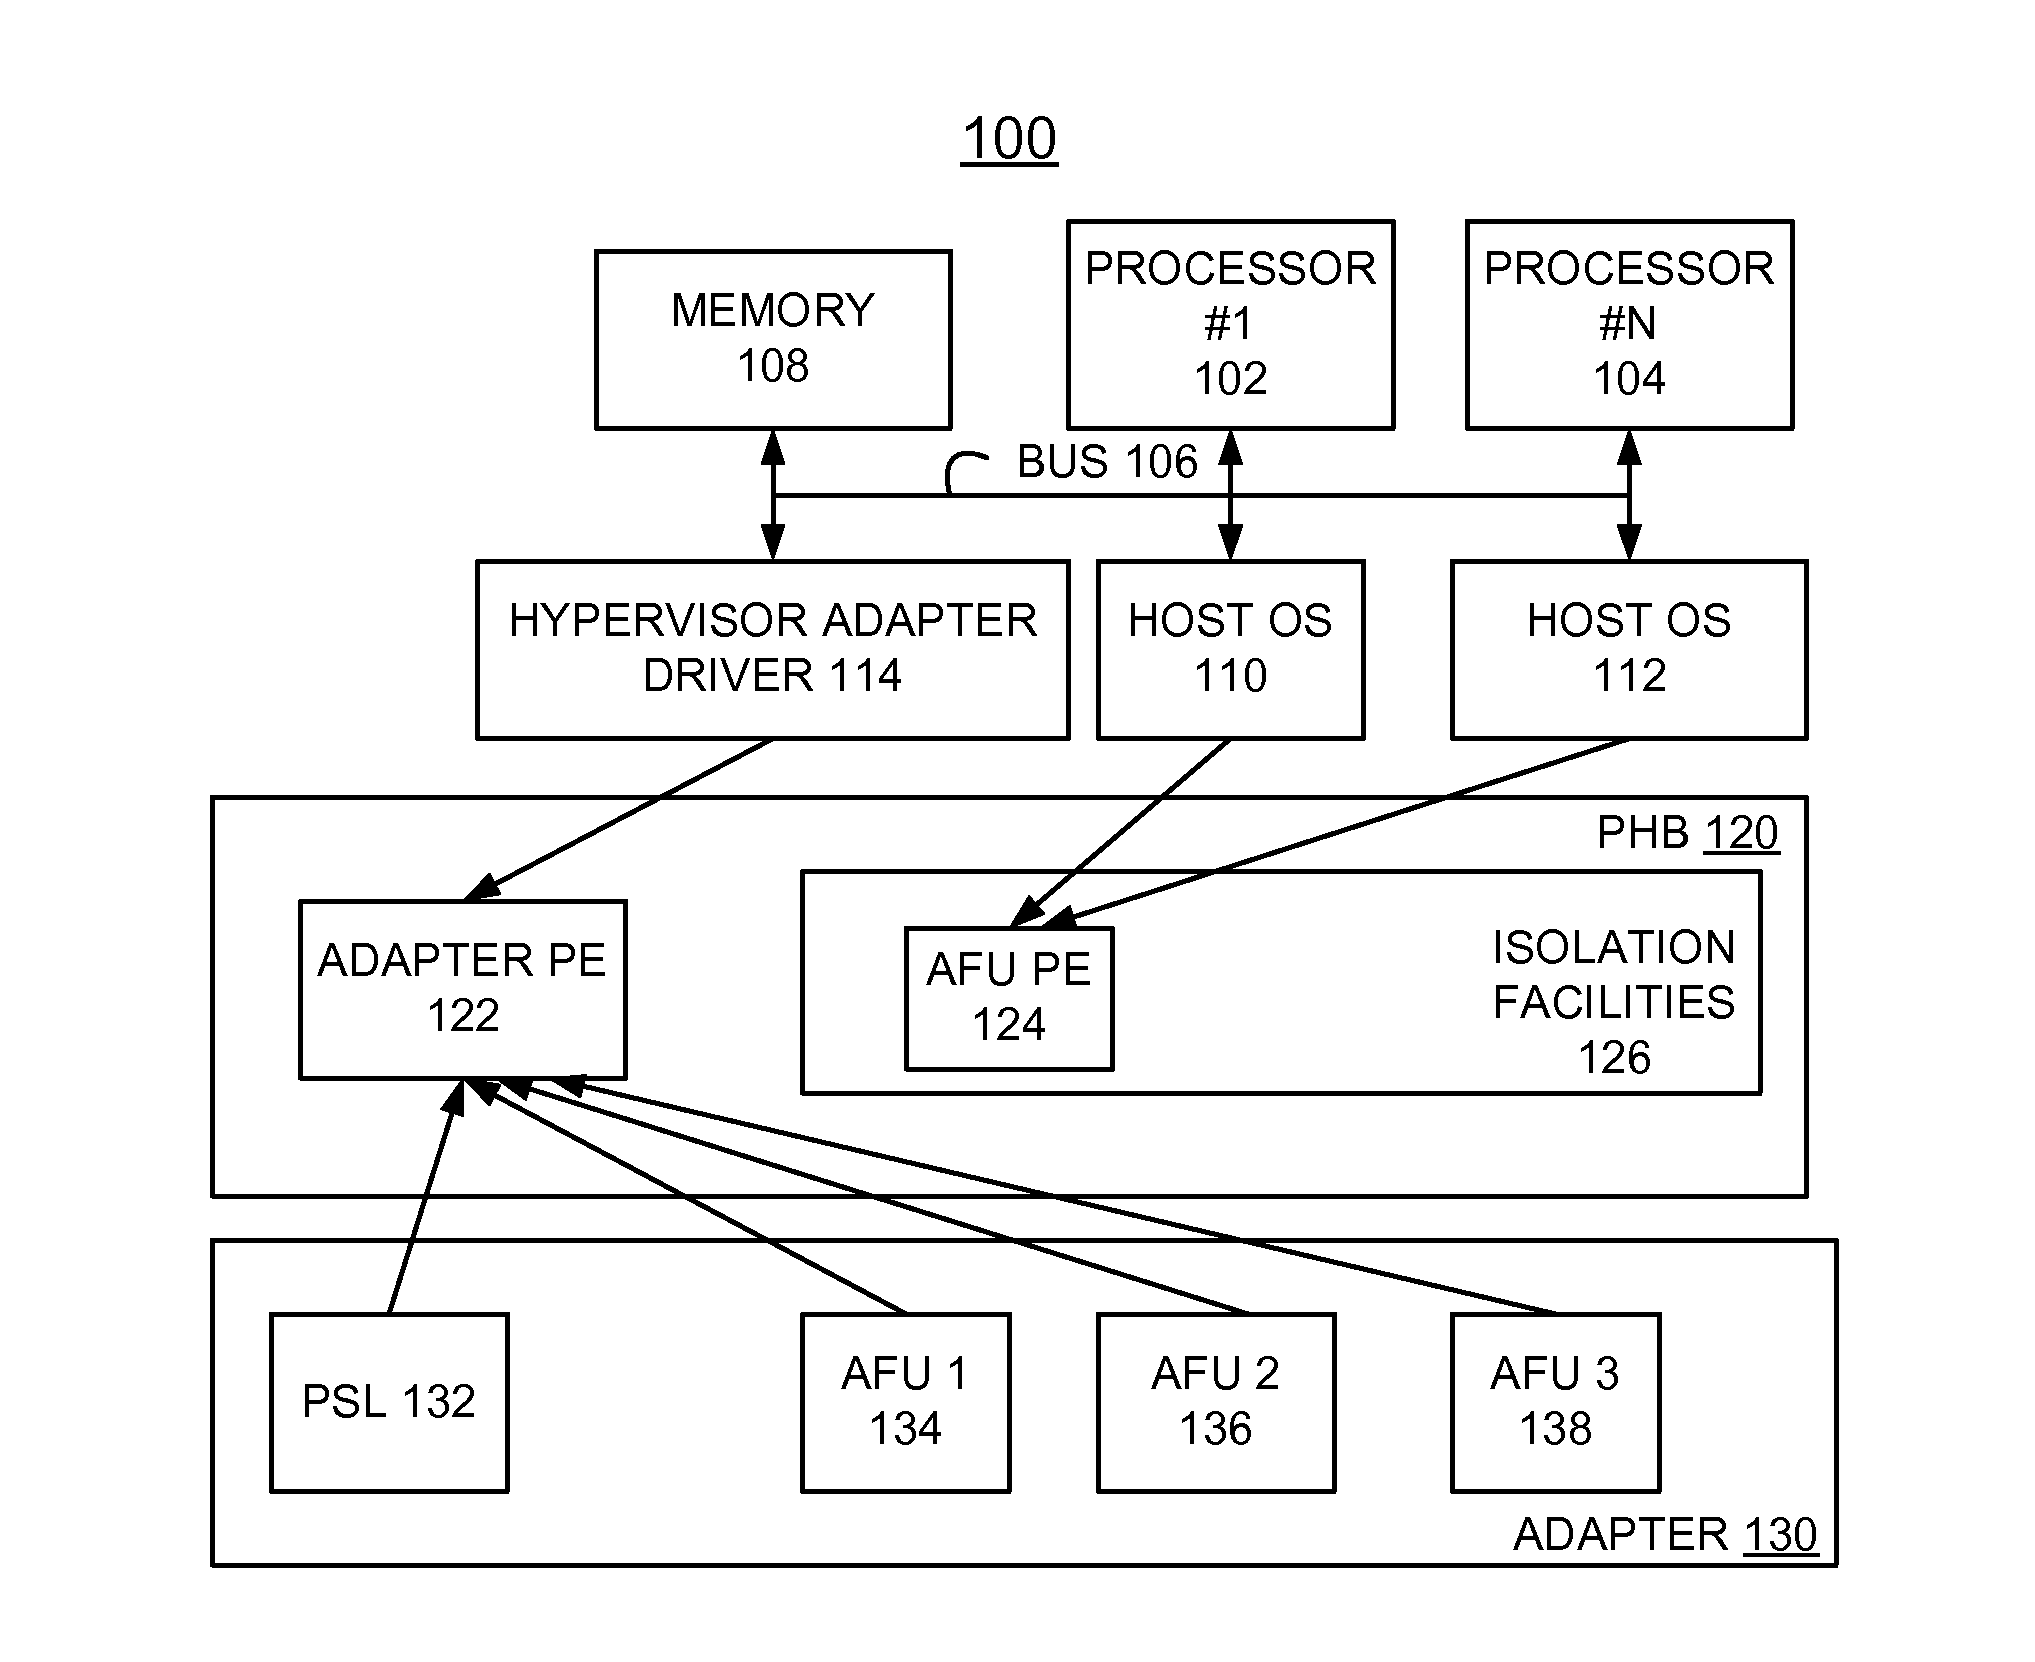 Implementing coherent accelerator function isolation for virtualization